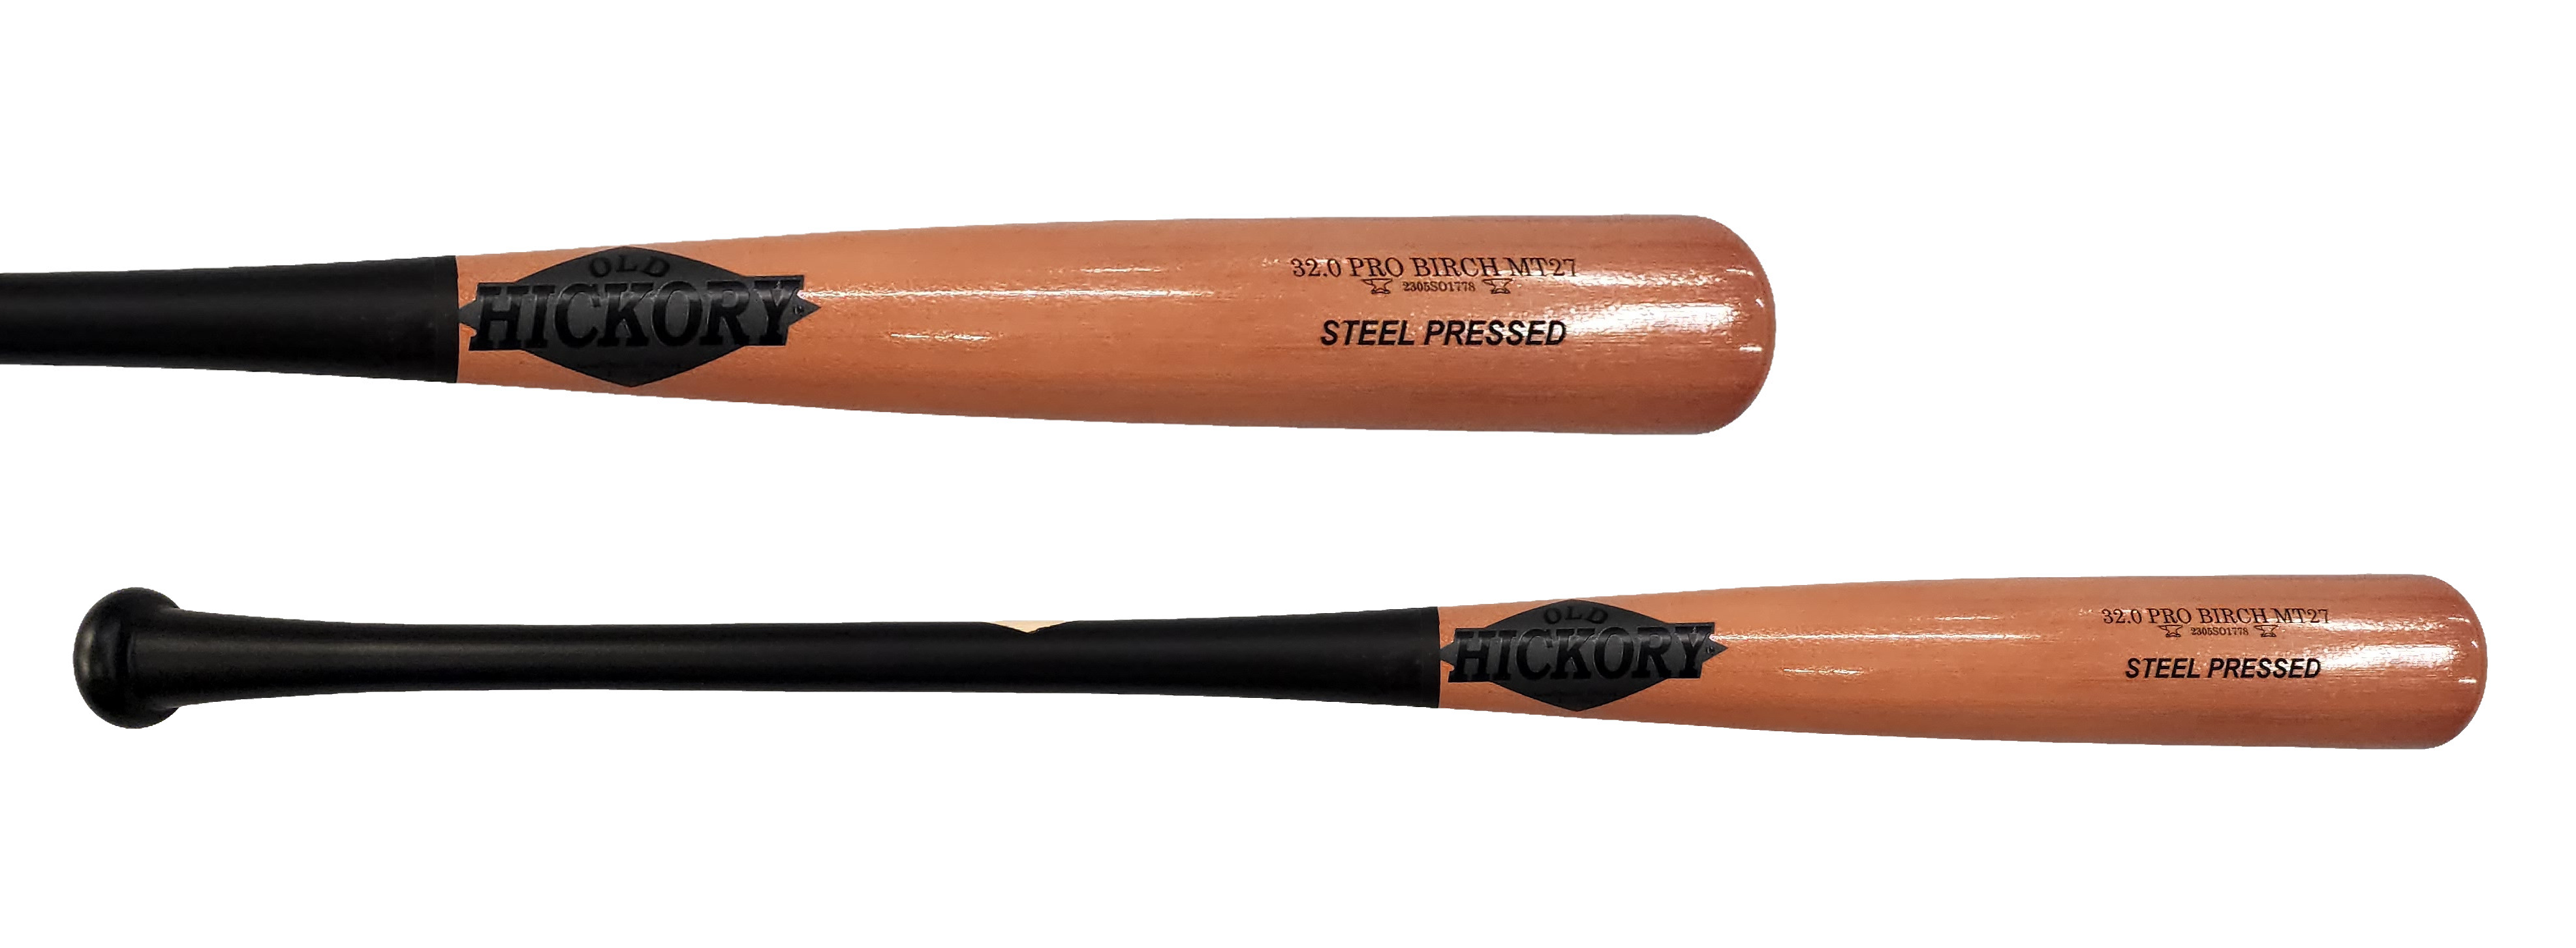 Old Hickory MT27 Birch Steel Pressed